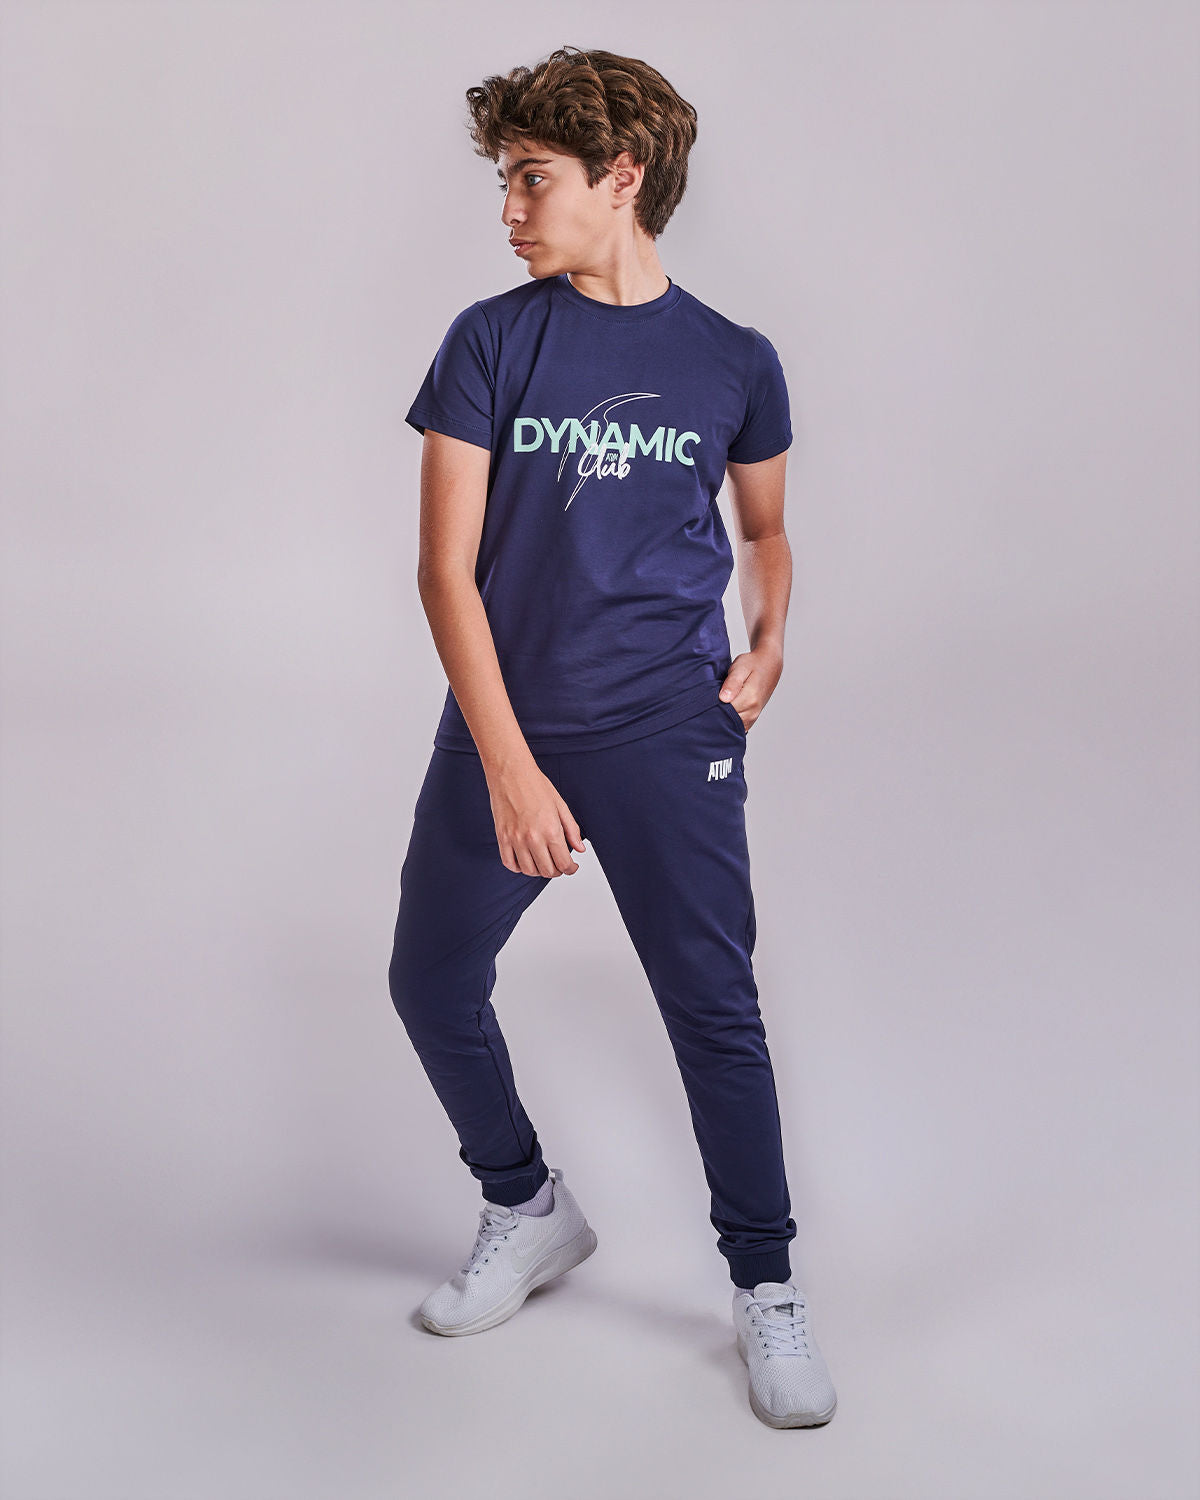 Photo by 𝗔𝗧𝗨𝗠 SPORTSWEAR ® on May 22, 2022. May be an image of 1 boy wears a navy t-shirt with a text ''Dynamic club", and a navy sweatpants.